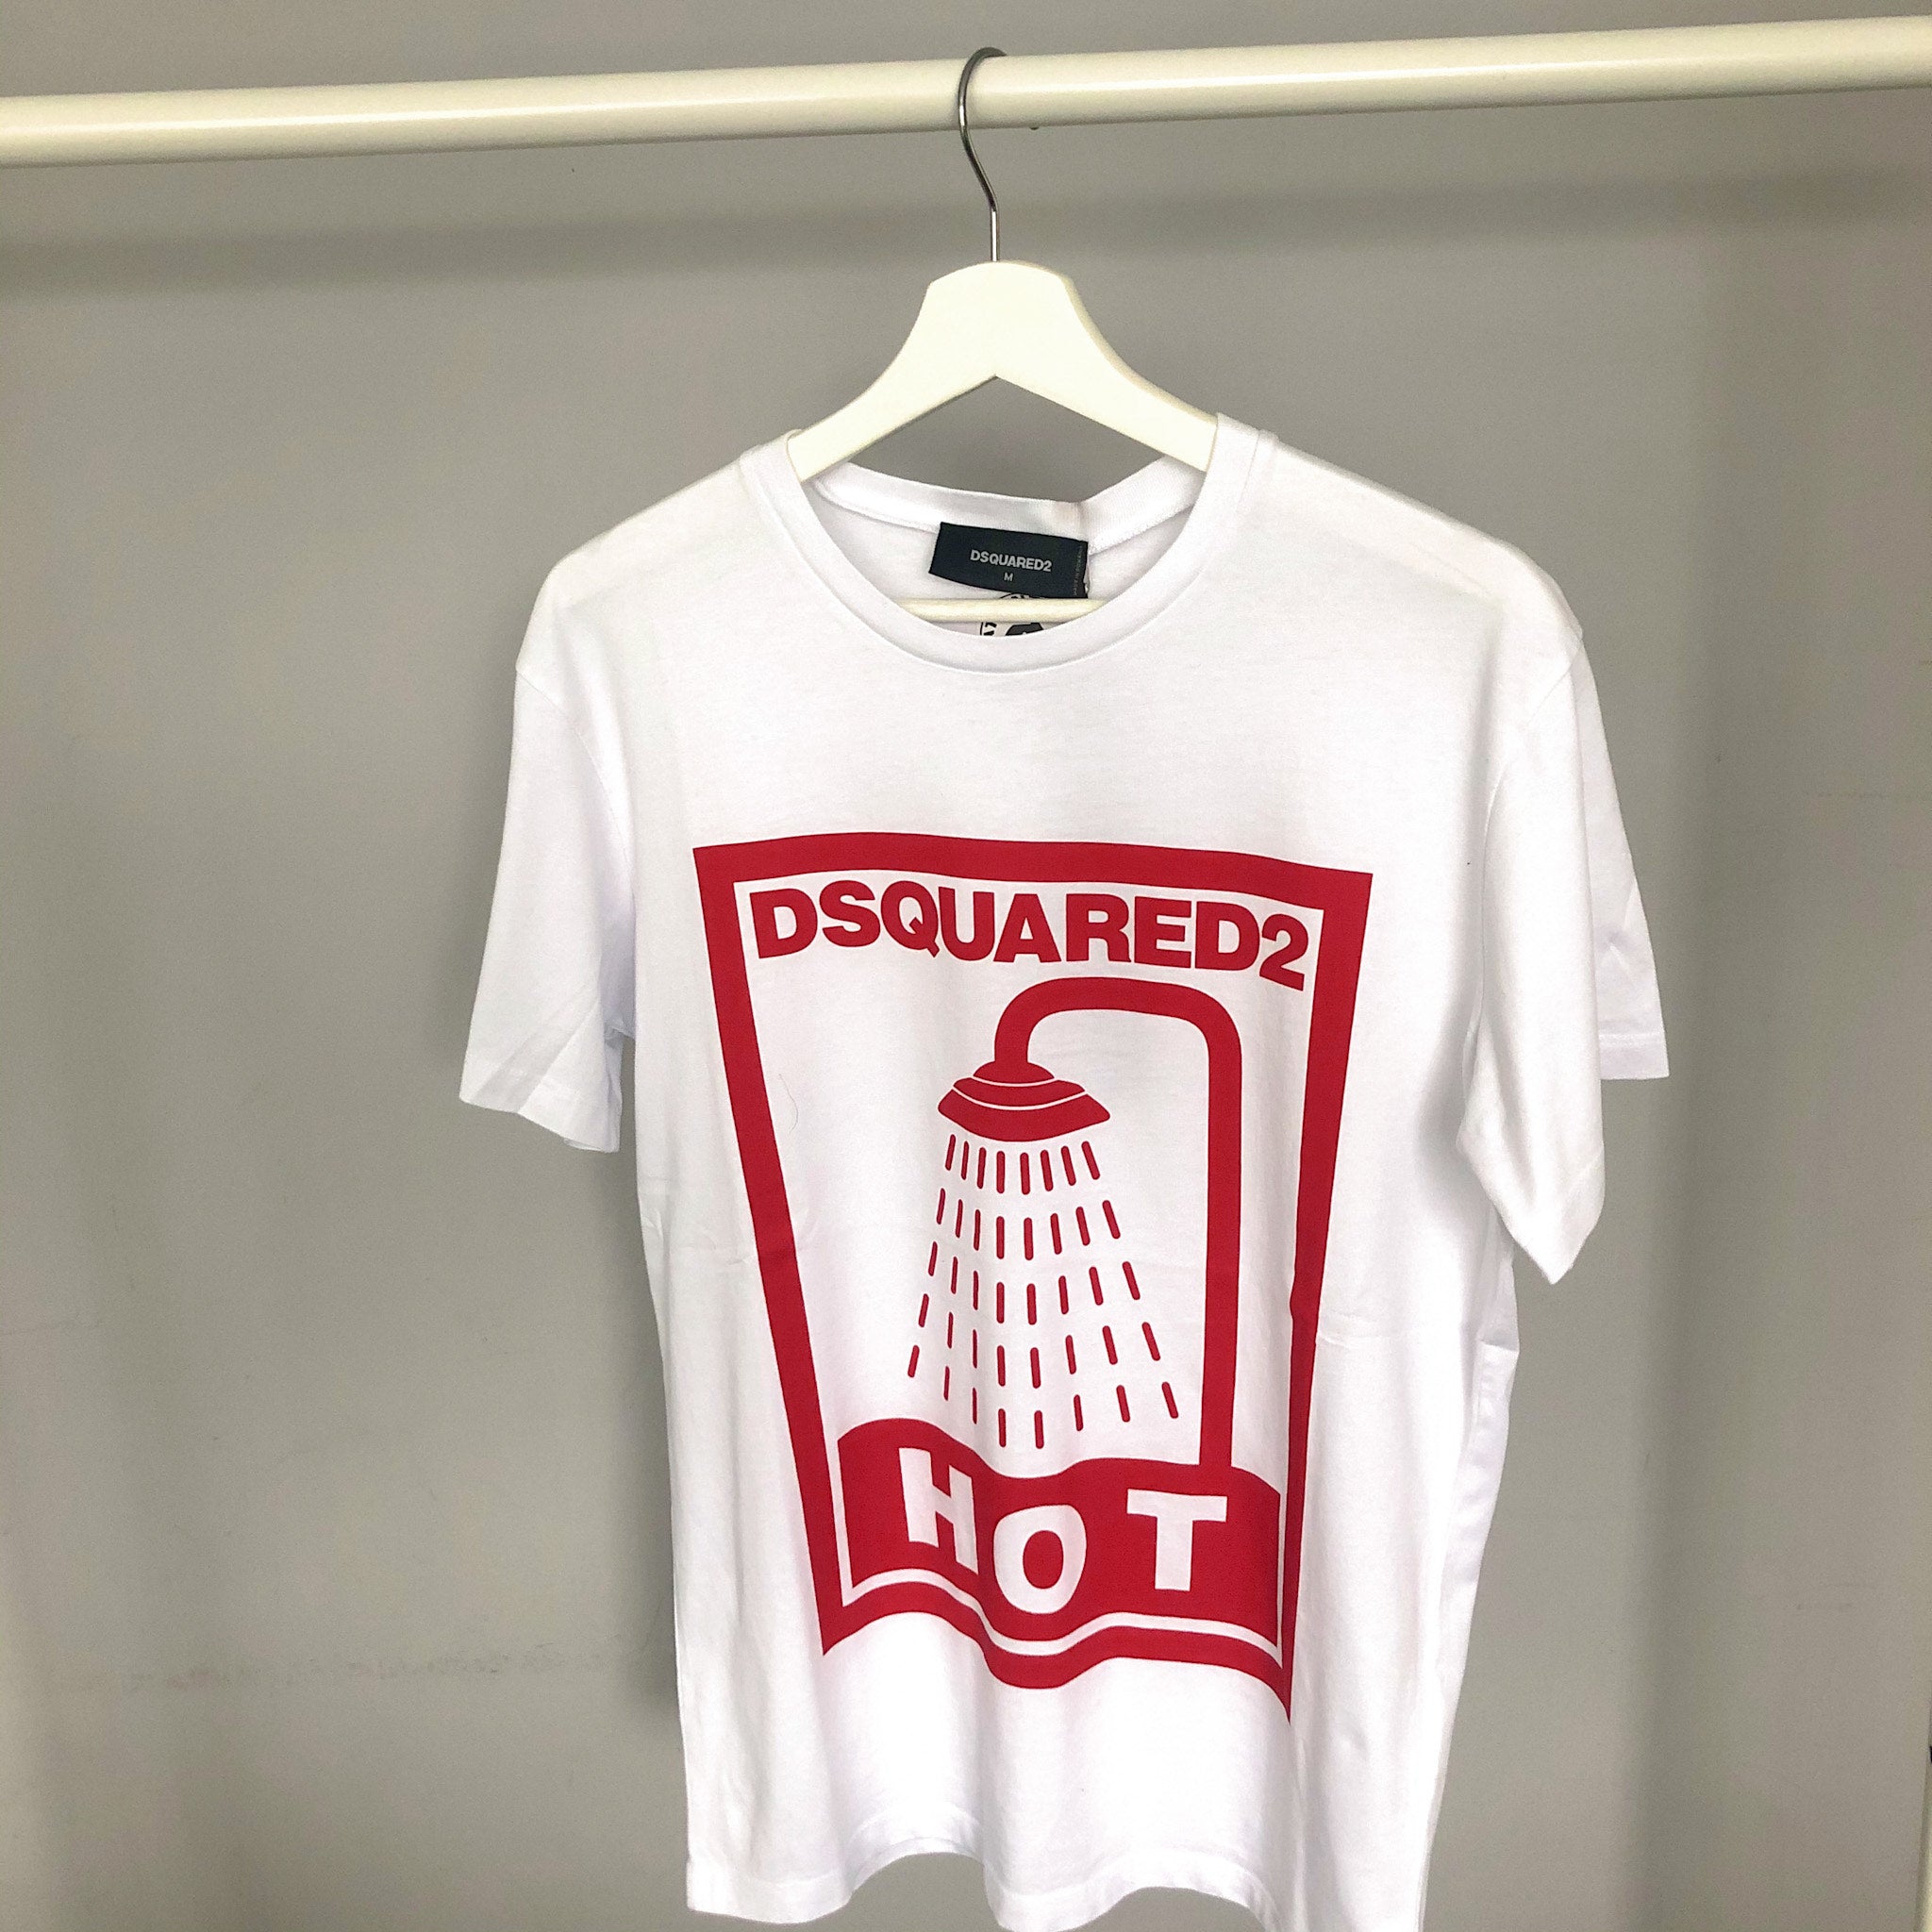 Dsquared Hot Shower Tee